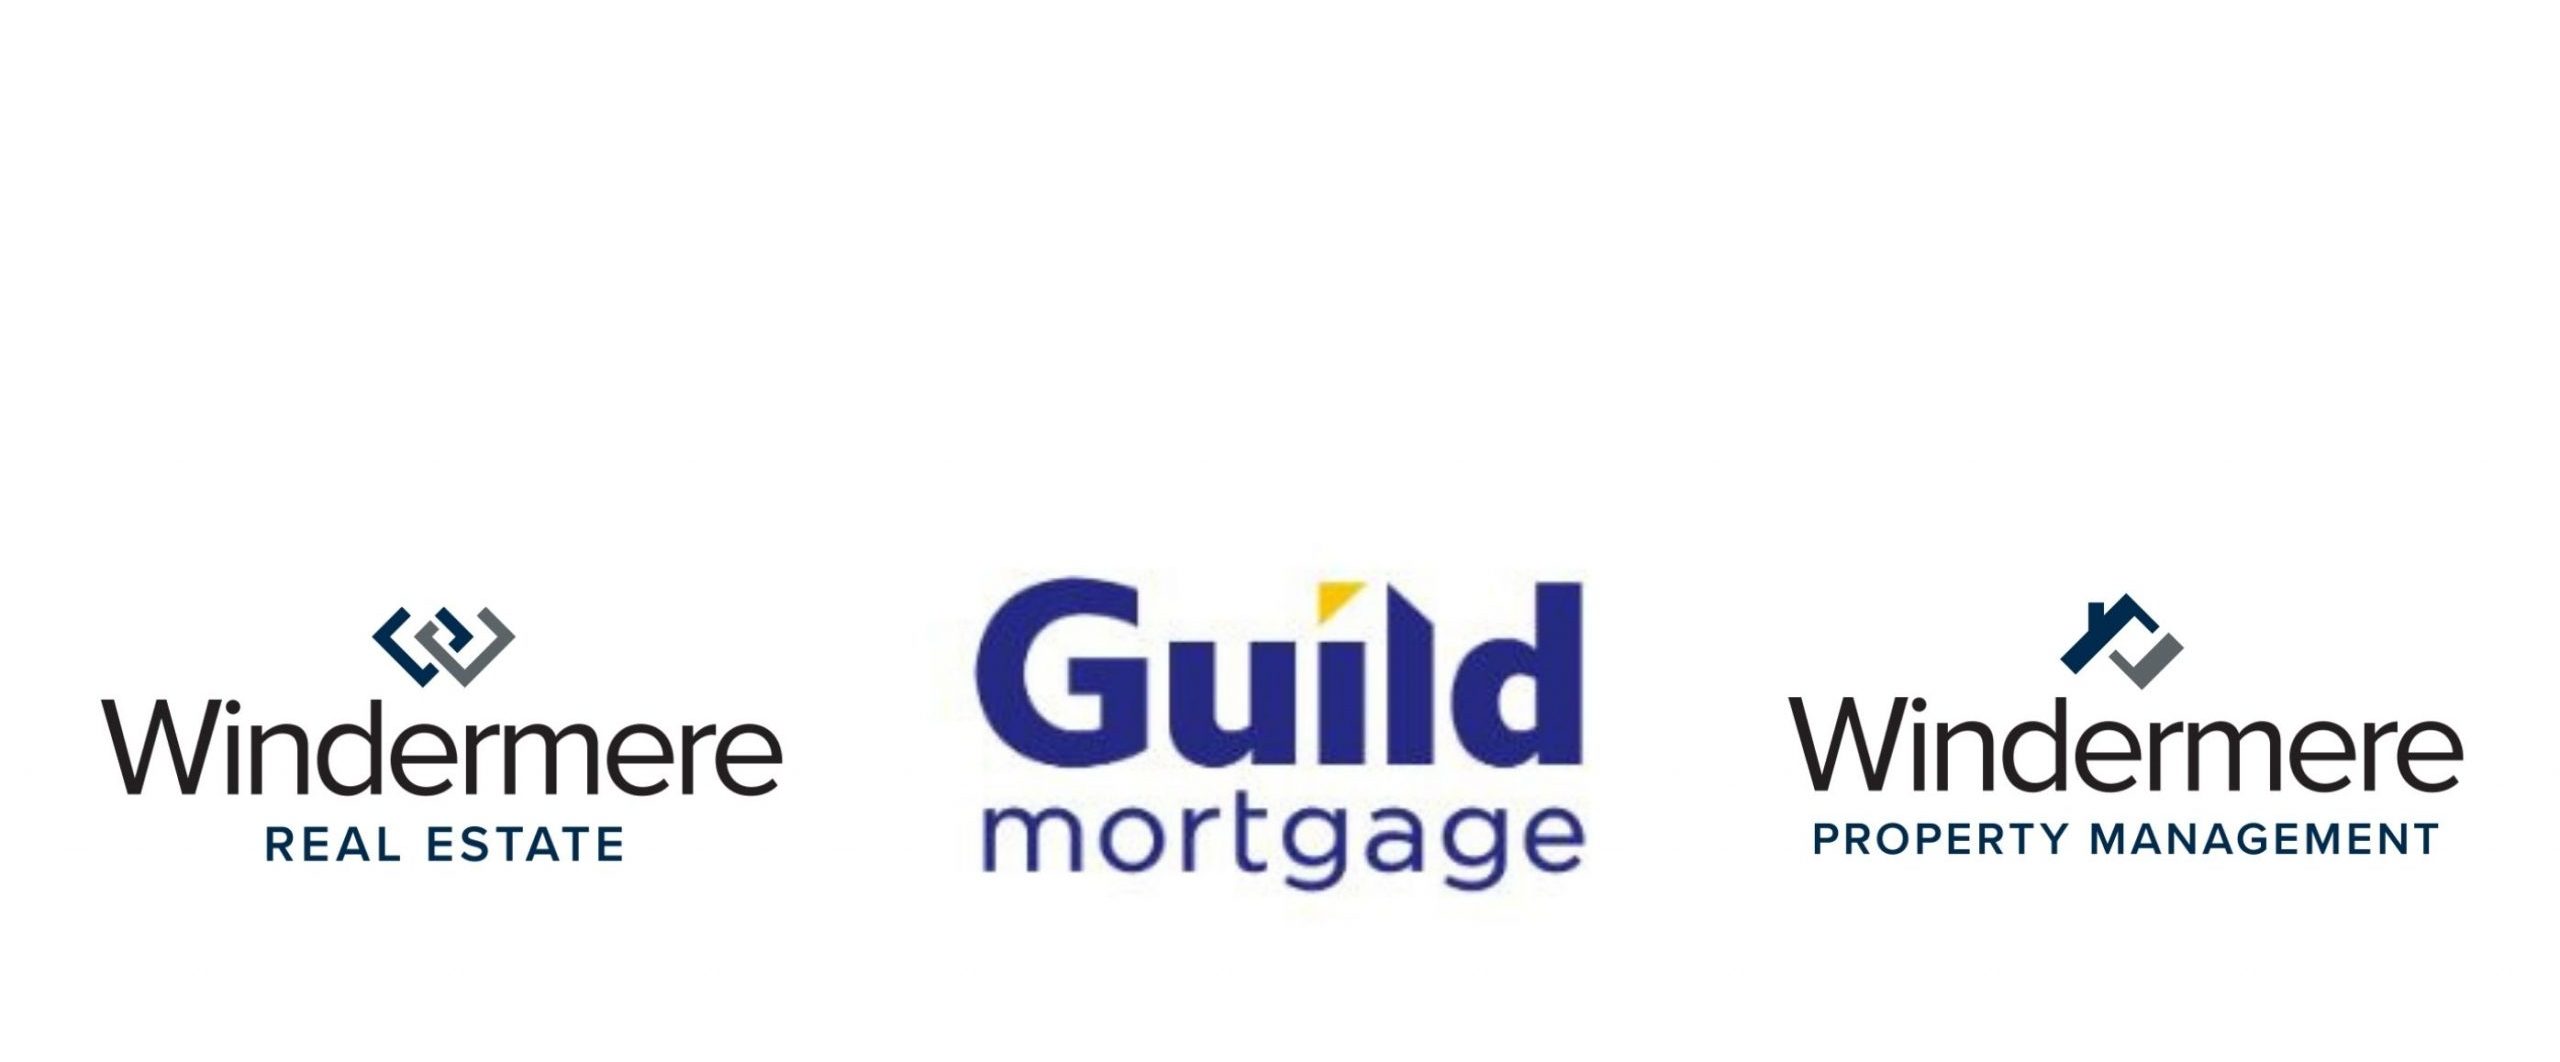 Windermere Real Estate, Windermere Property Managment, Guild Mortgage, Whidbey Island, Buy, Sale, Rent, Mortgage, Loans